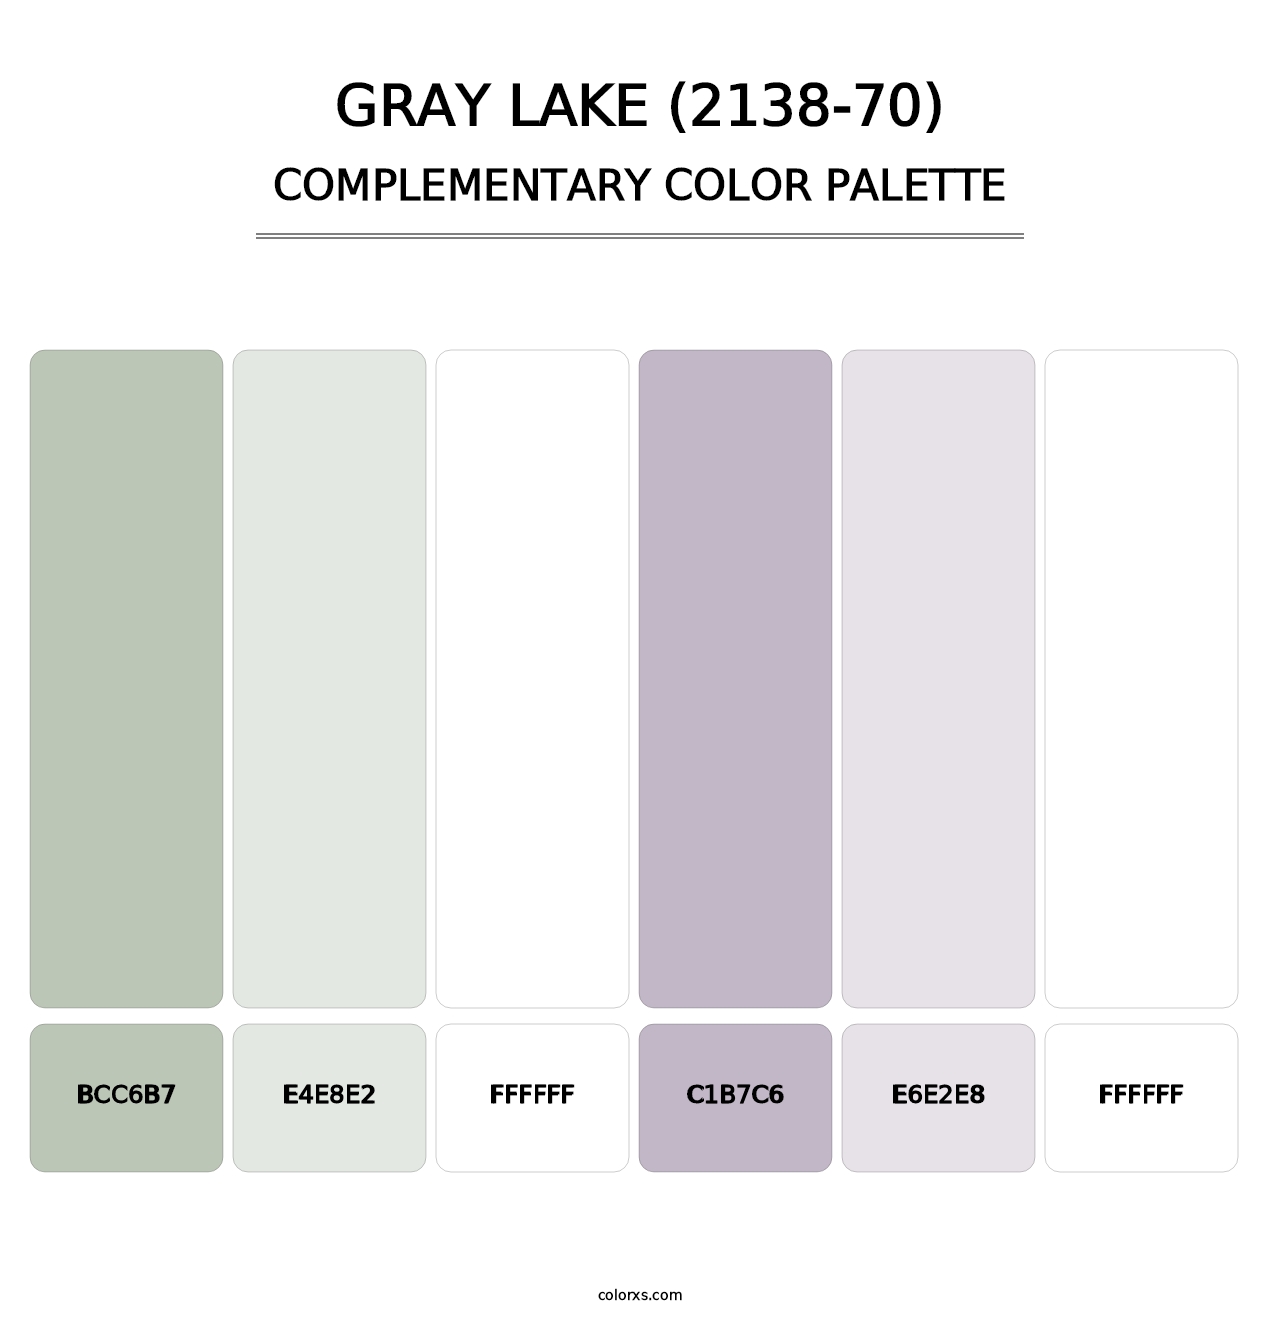 Gray Lake (2138-70) - Complementary Color Palette